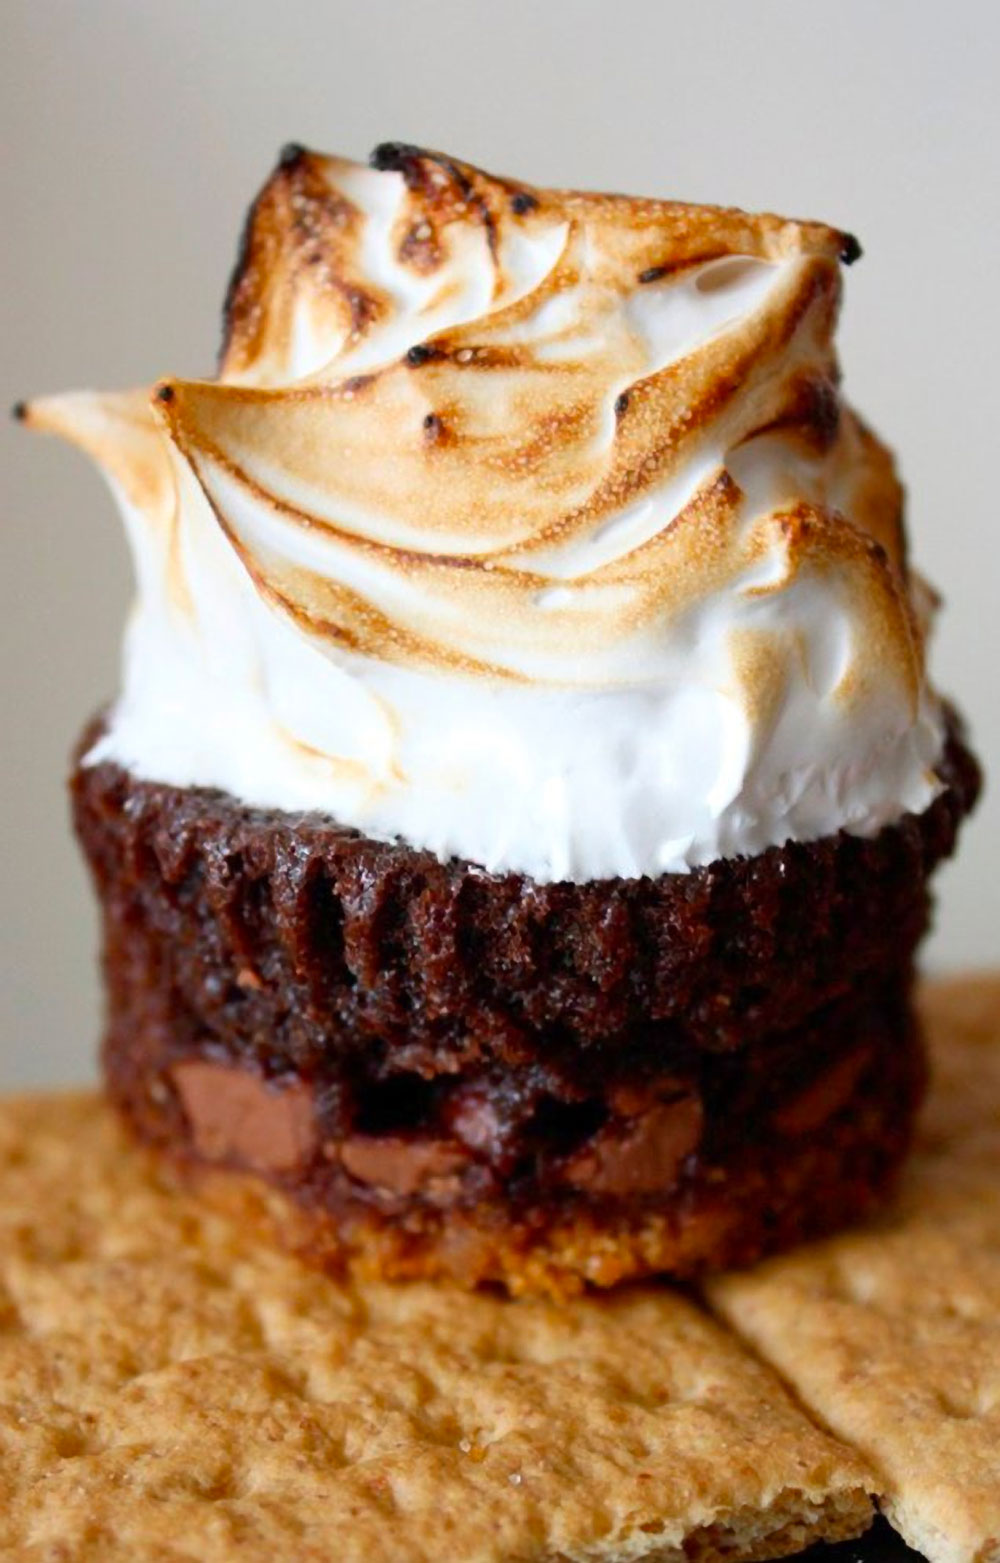 S'more Cupcakes